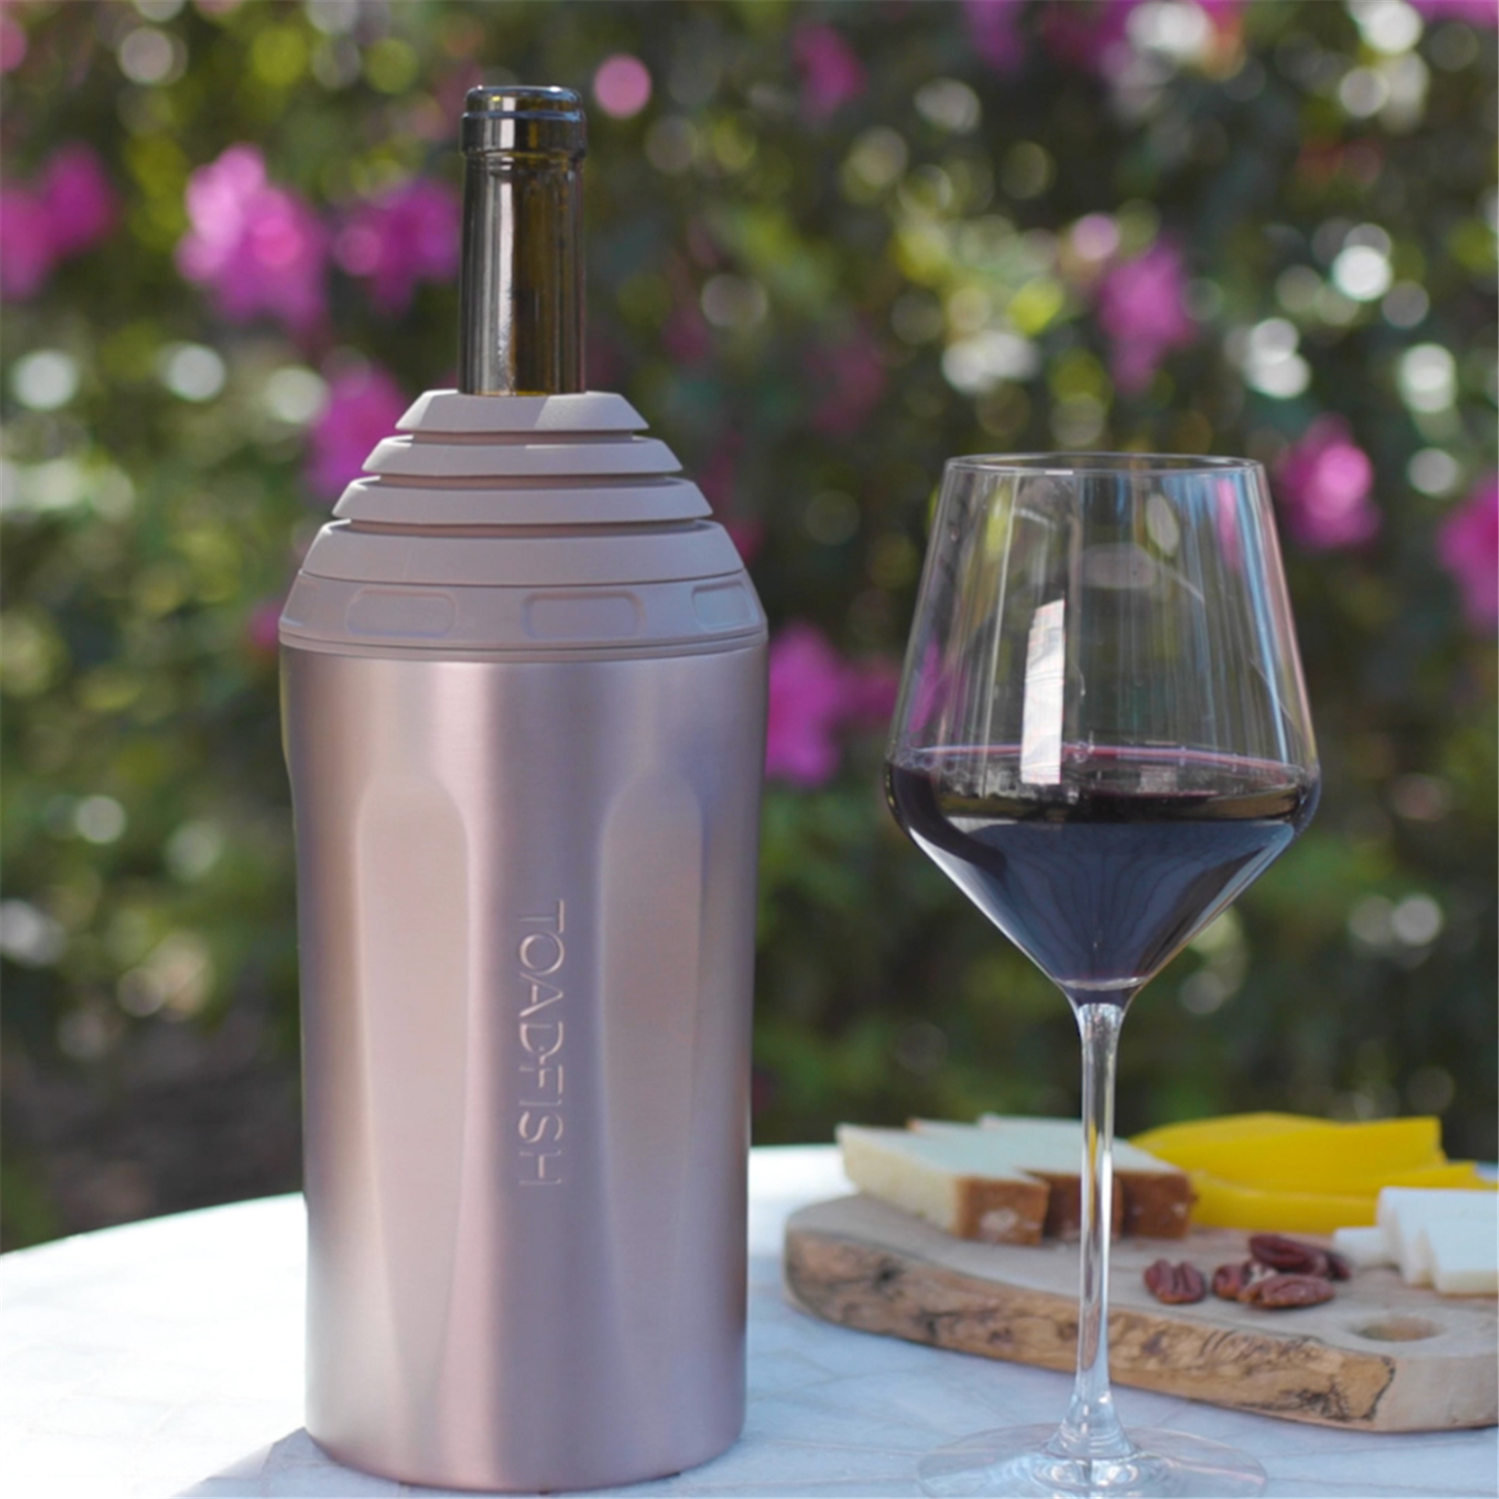 TOADFISH Toadfish Insulated Wine Chiller With Flexi-lock Pouring, Fits Most Bottles